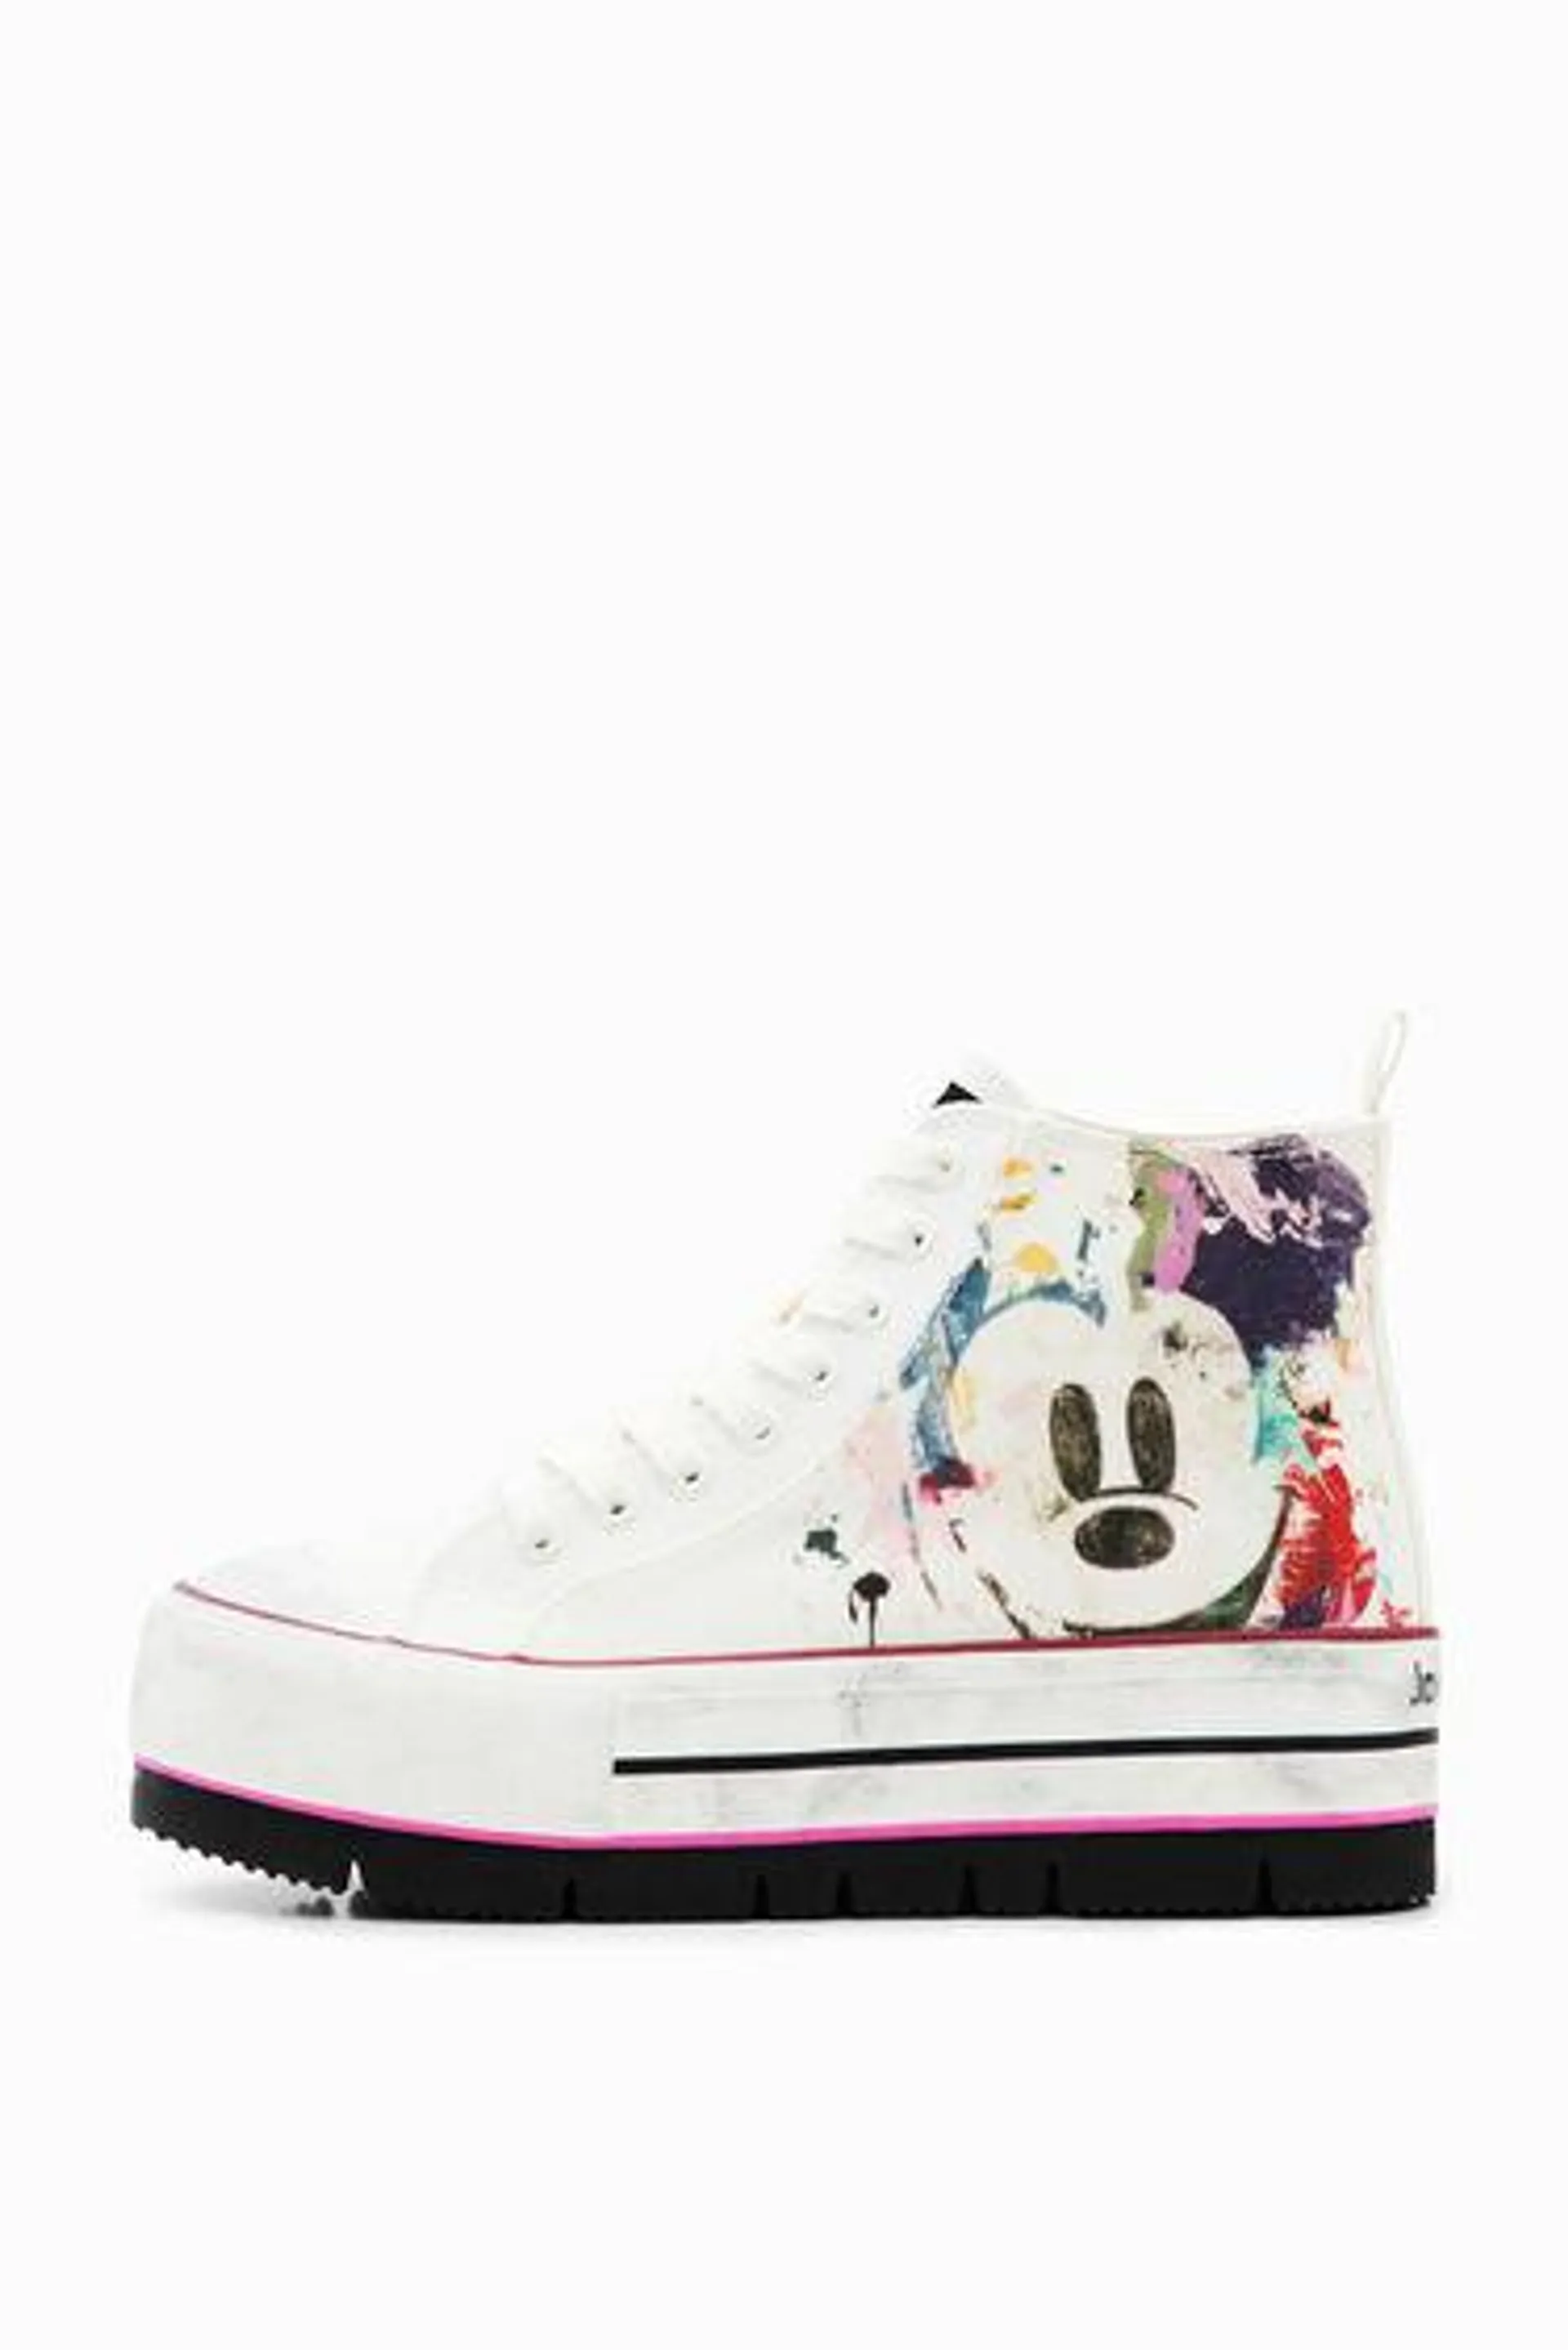 Disney's Mickey Mouse high-top platform sneakers